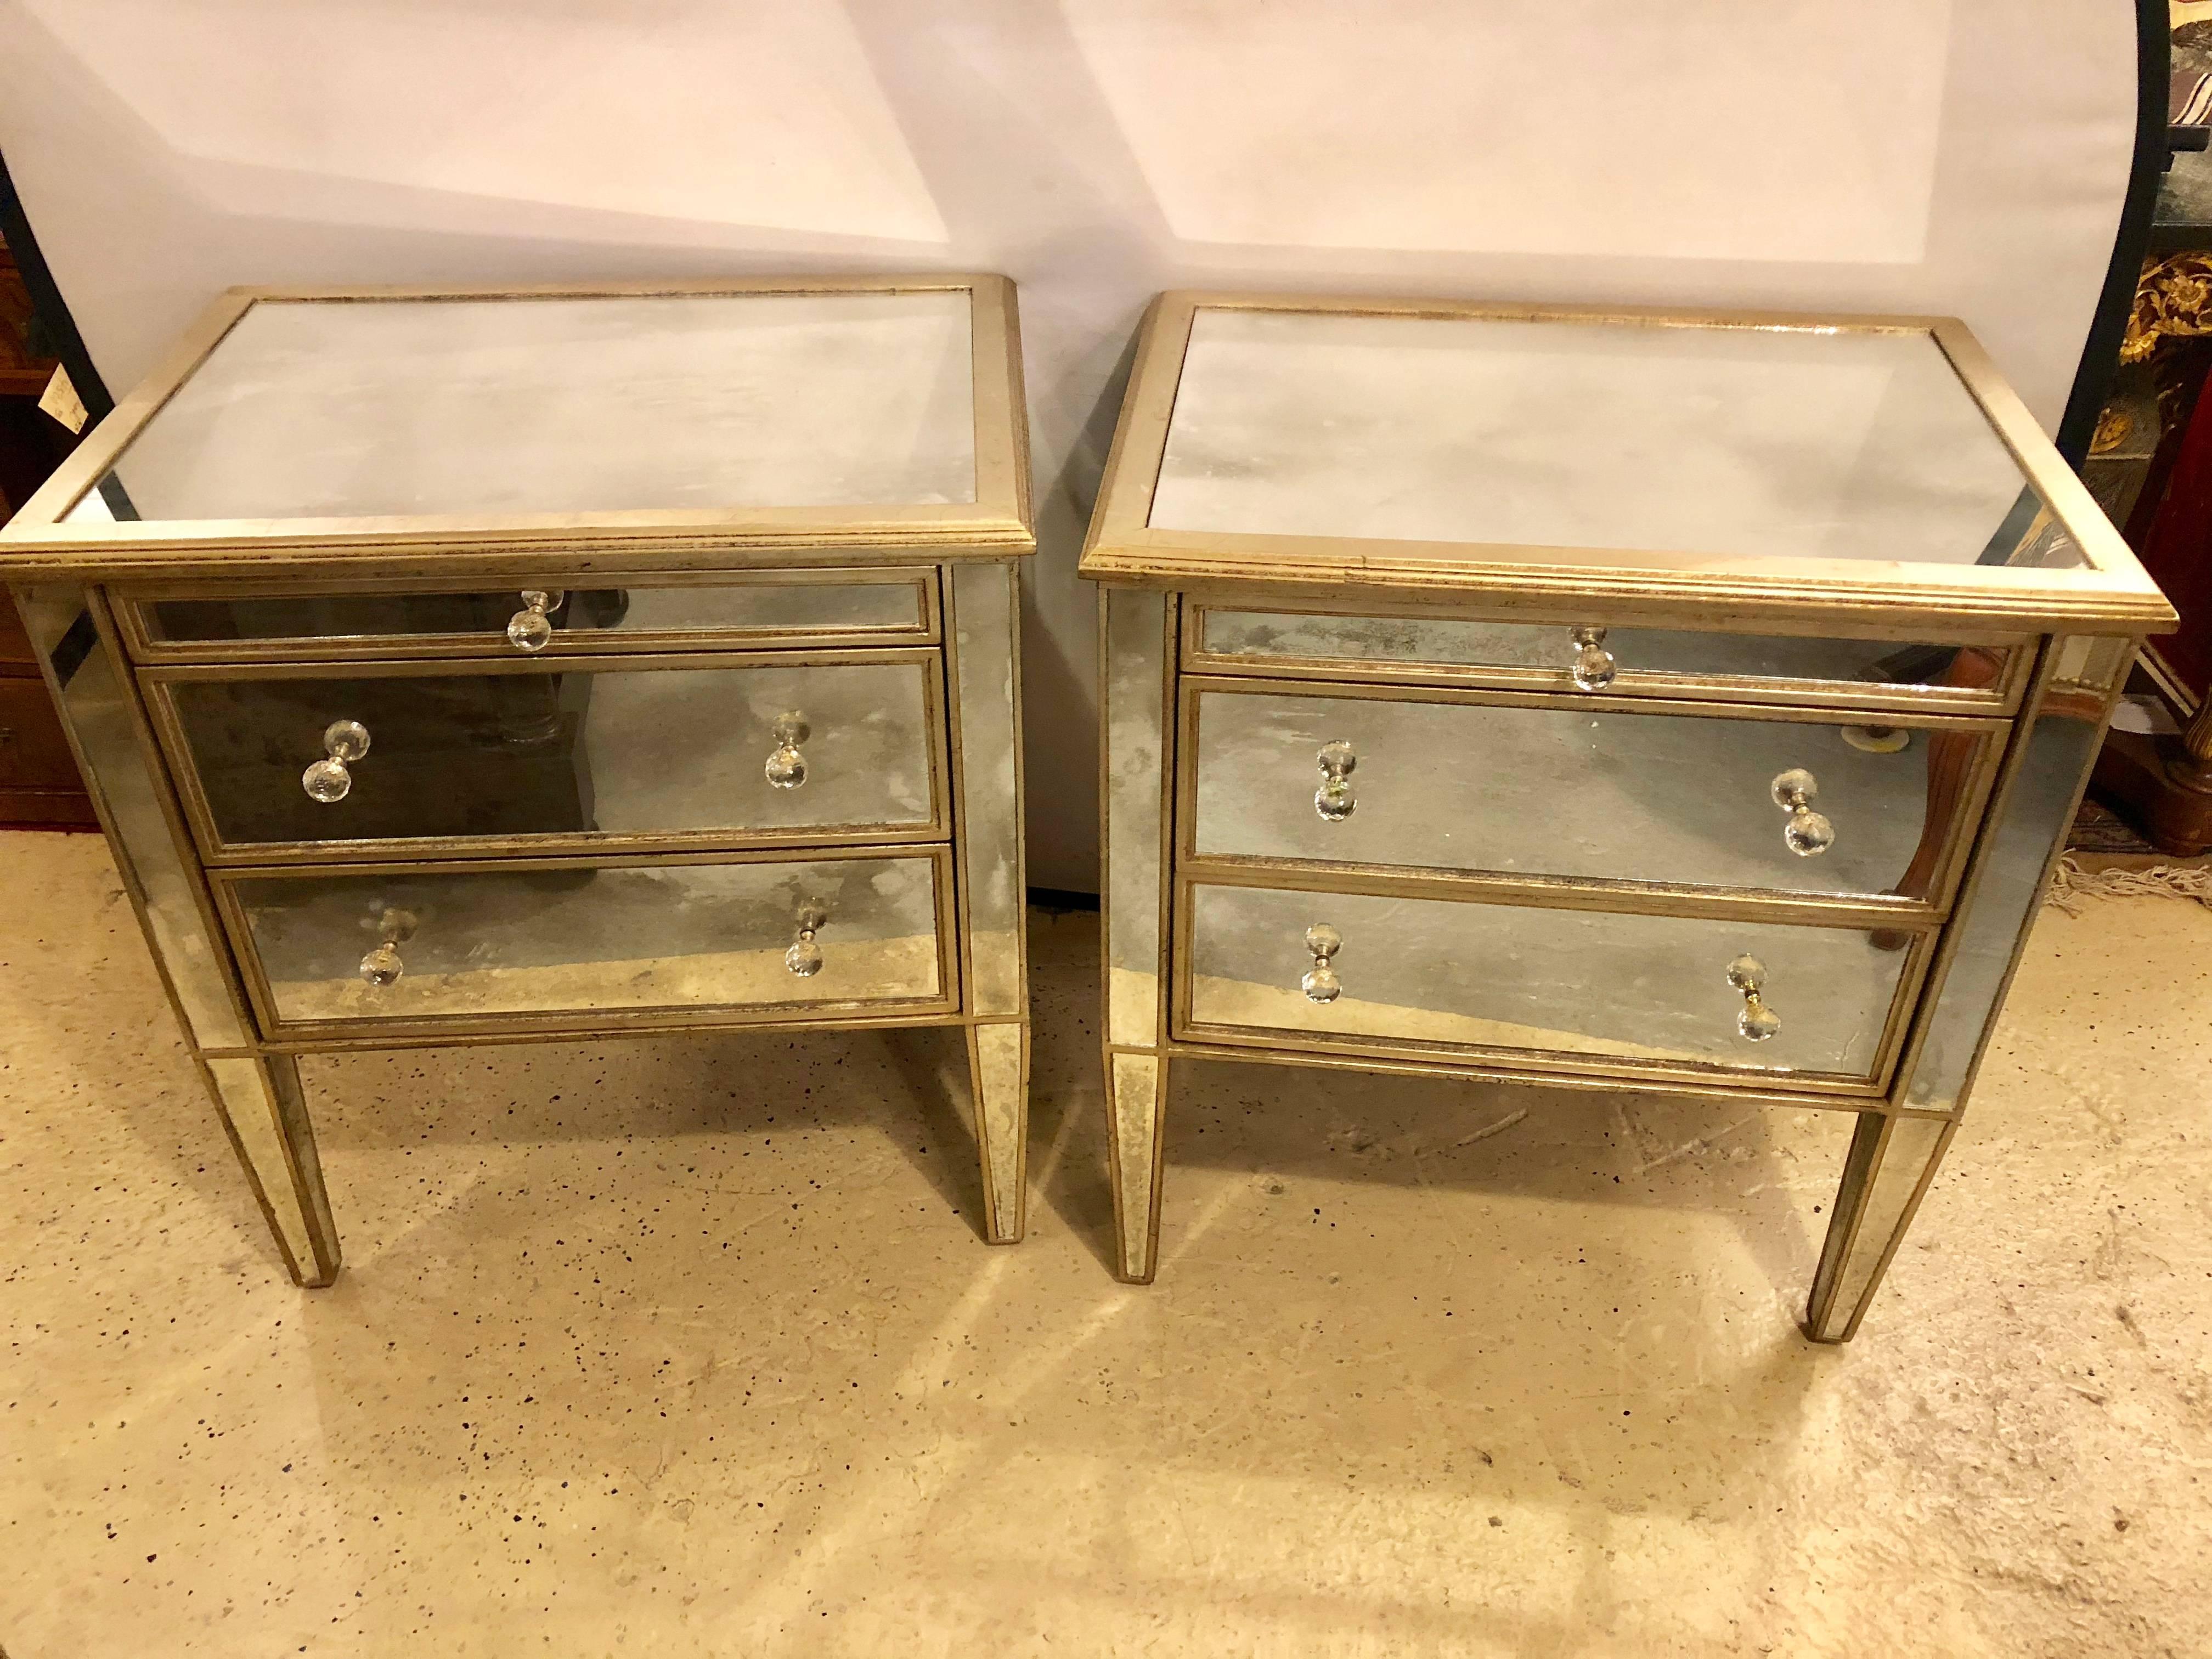 Pair of Hollywood Regency style custom three-drawer antiqued mirror nightstands or commodes. Mirrored on all sides including the back on these fine custom quality mirrored commodes or night stands. Each having two drawers under a pull-out serving or